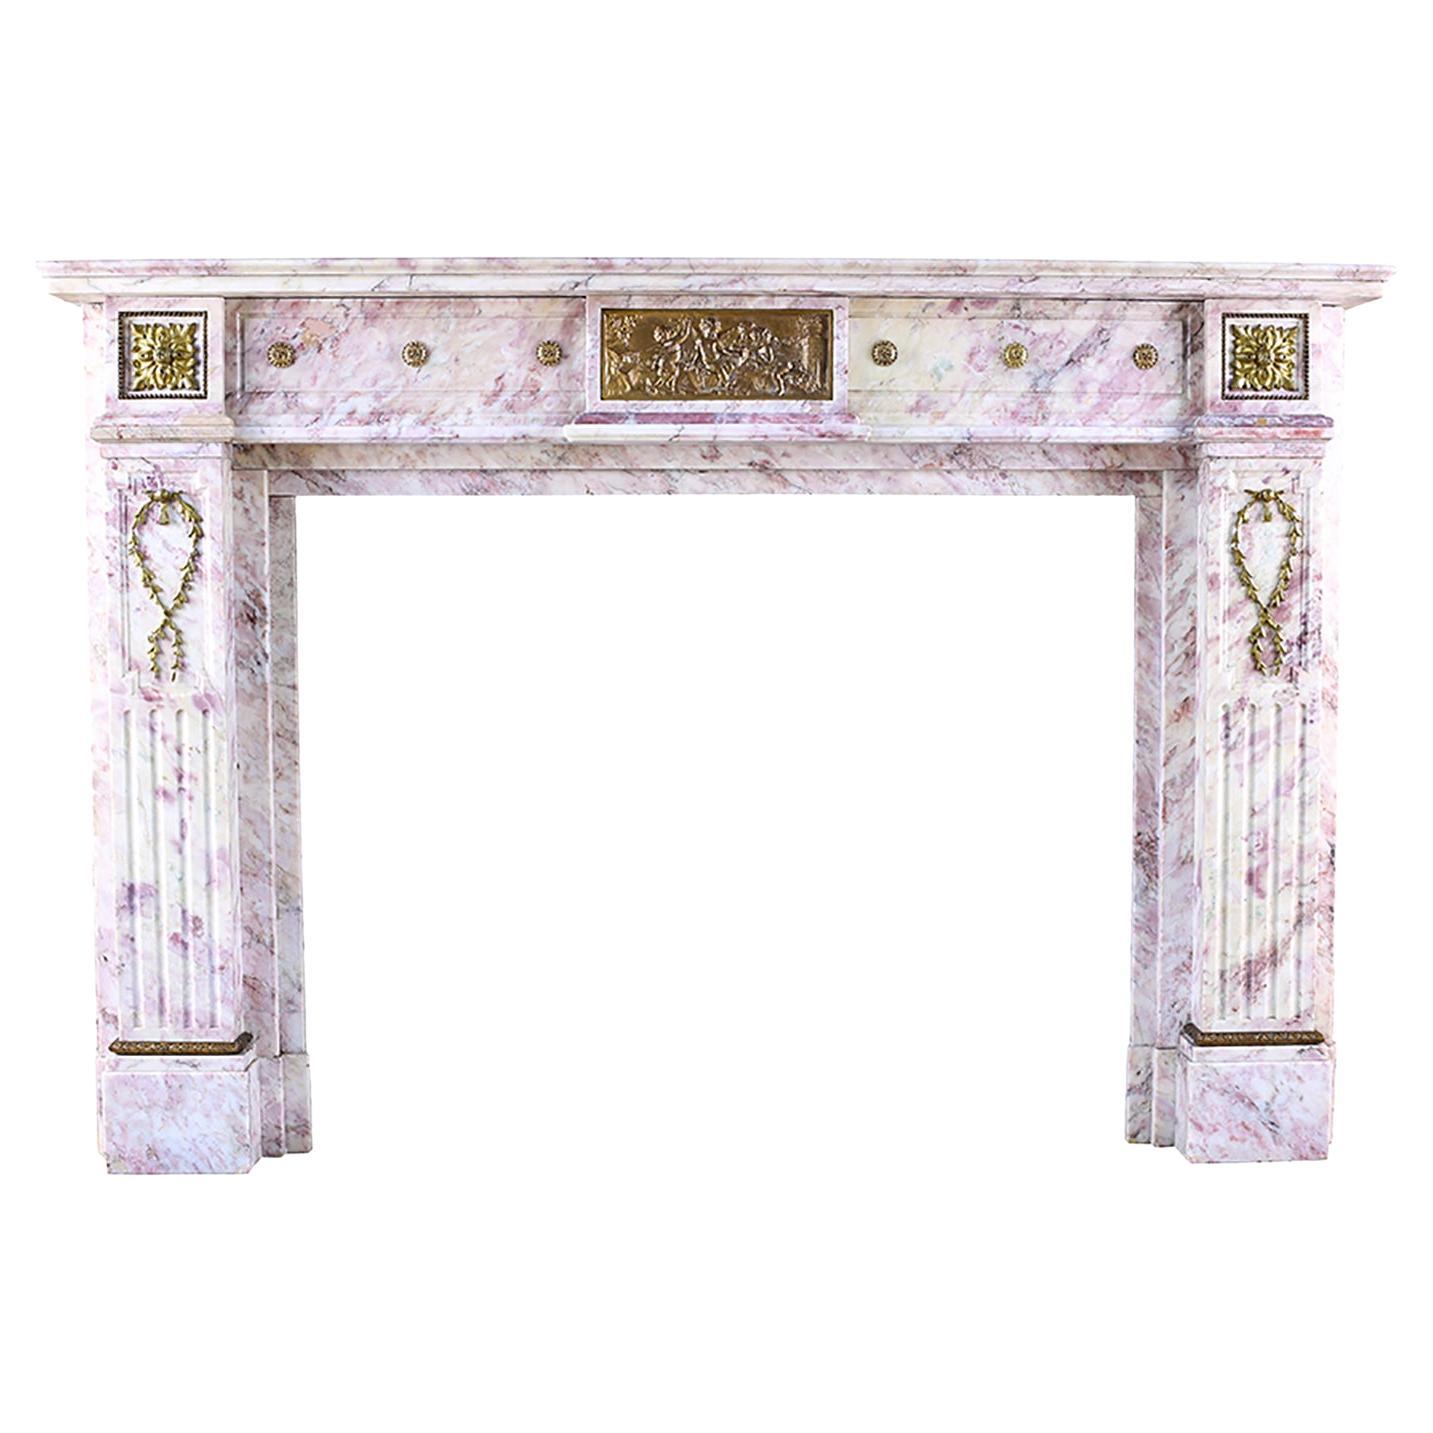 Elegant Louis Xvi Style Fireplace Surround, French, Mid 19th Century For Sale